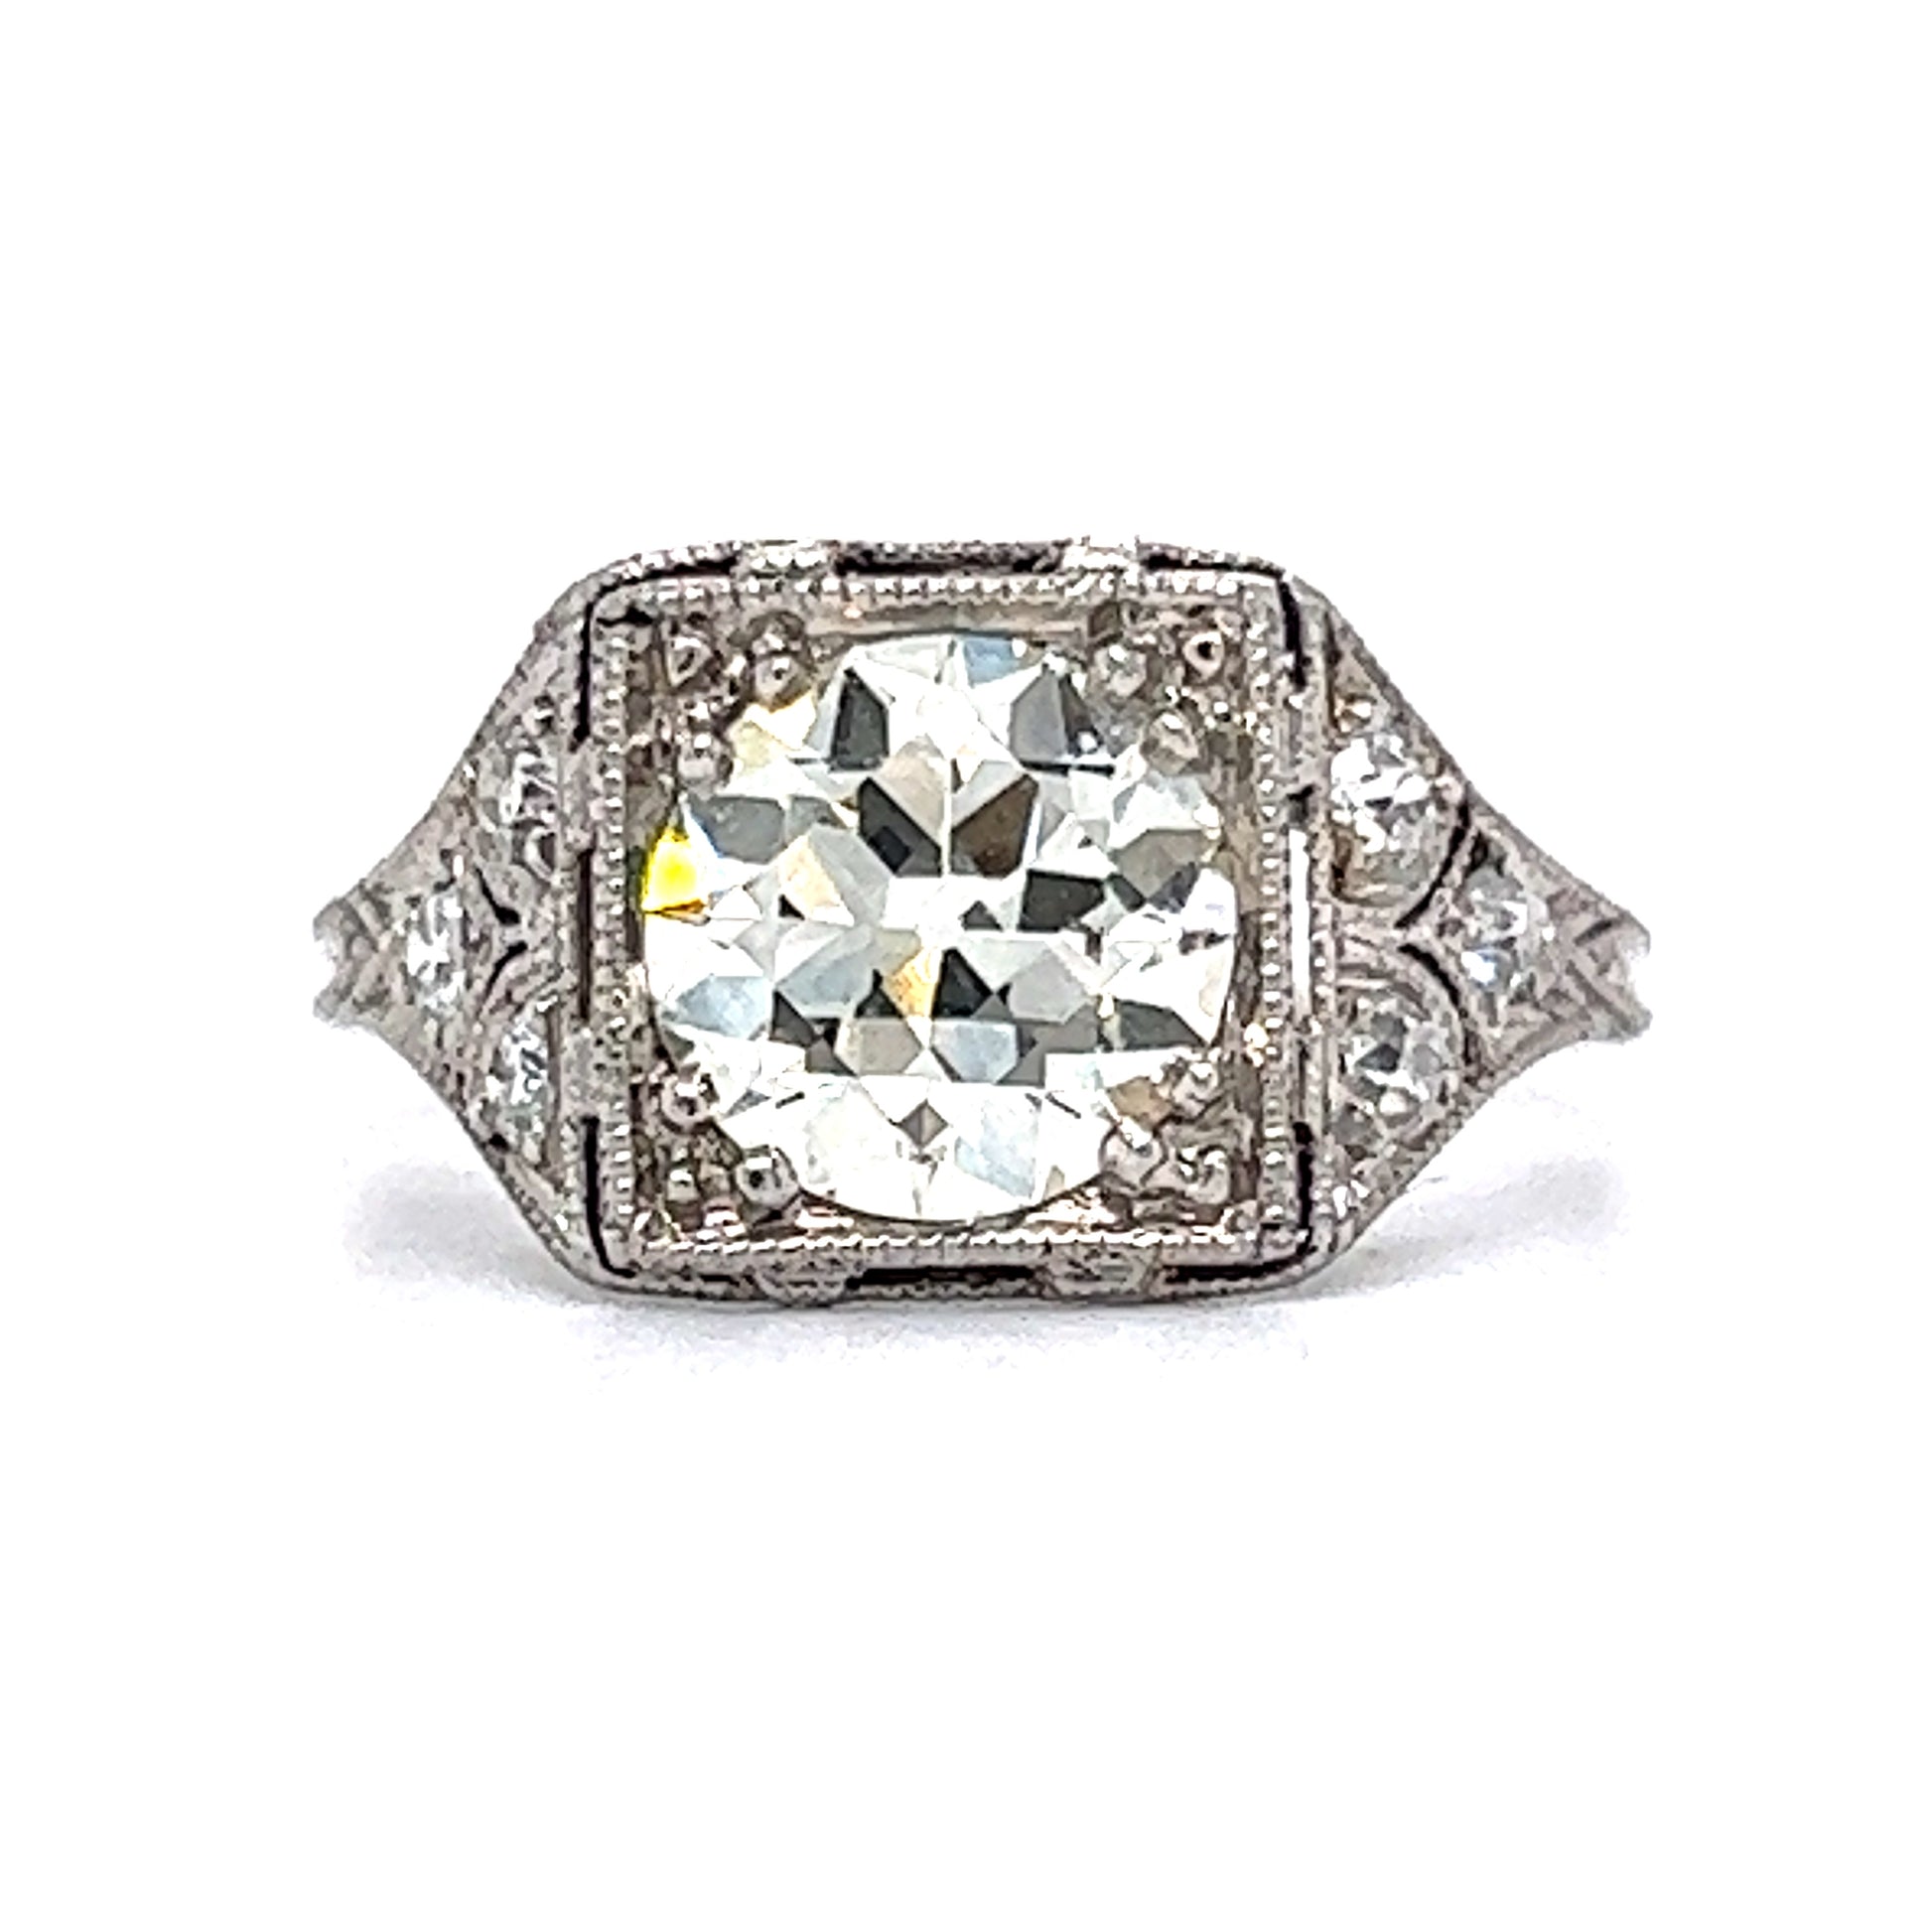 1.57 Antique Art Deco Diamond Engagement Ring in PlatinumComposition: PlatinumRing Size: 5.75Total Diamond Weight: 1.75 ctTotal Gram Weight: 3.5 g